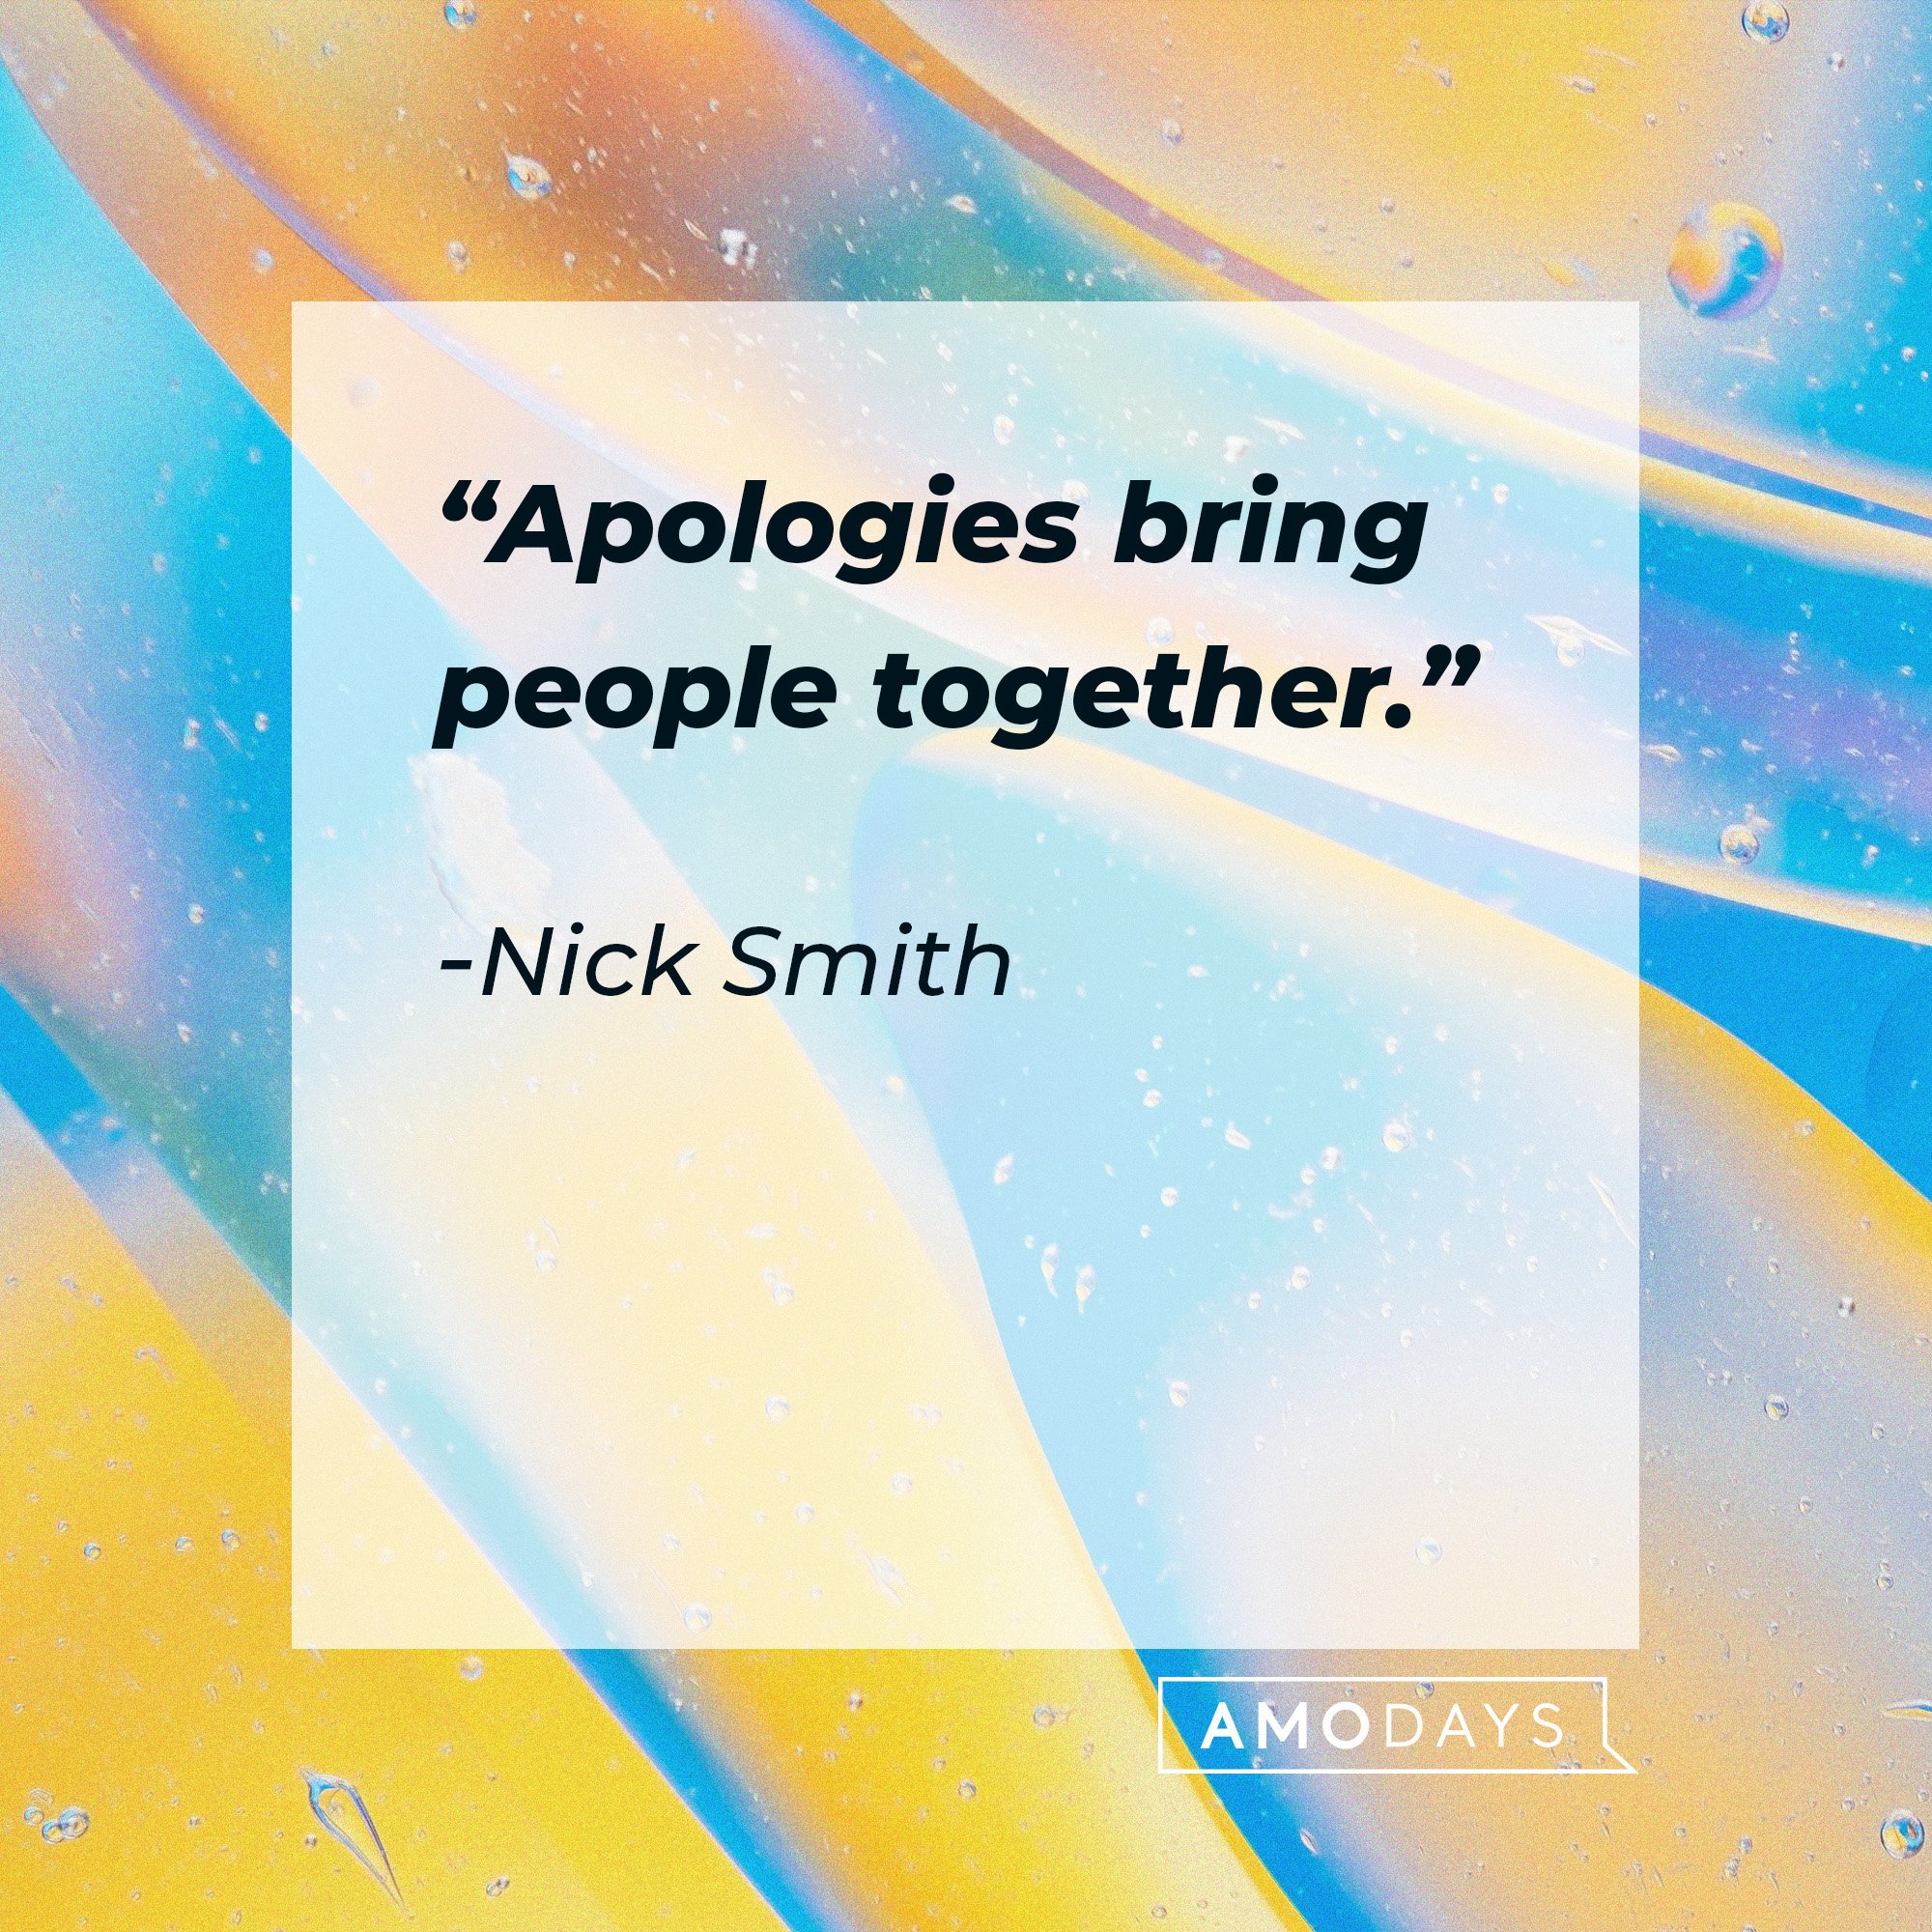 Nick Smith's quote: “Apologies bring people together.” | Image: AmoDays